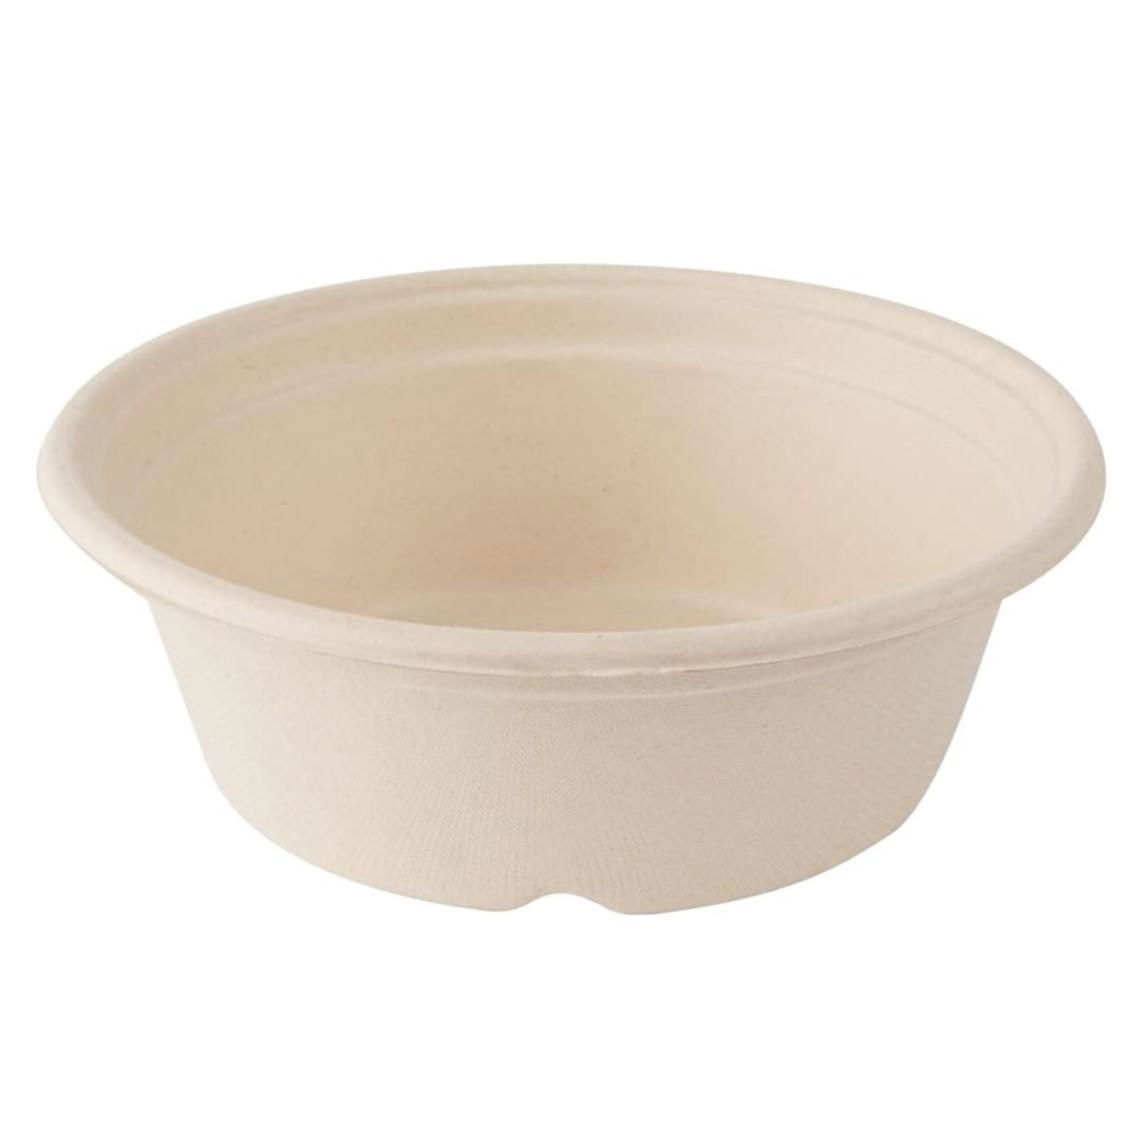 Compostable disposable food bowls for all types of events with direct food  2